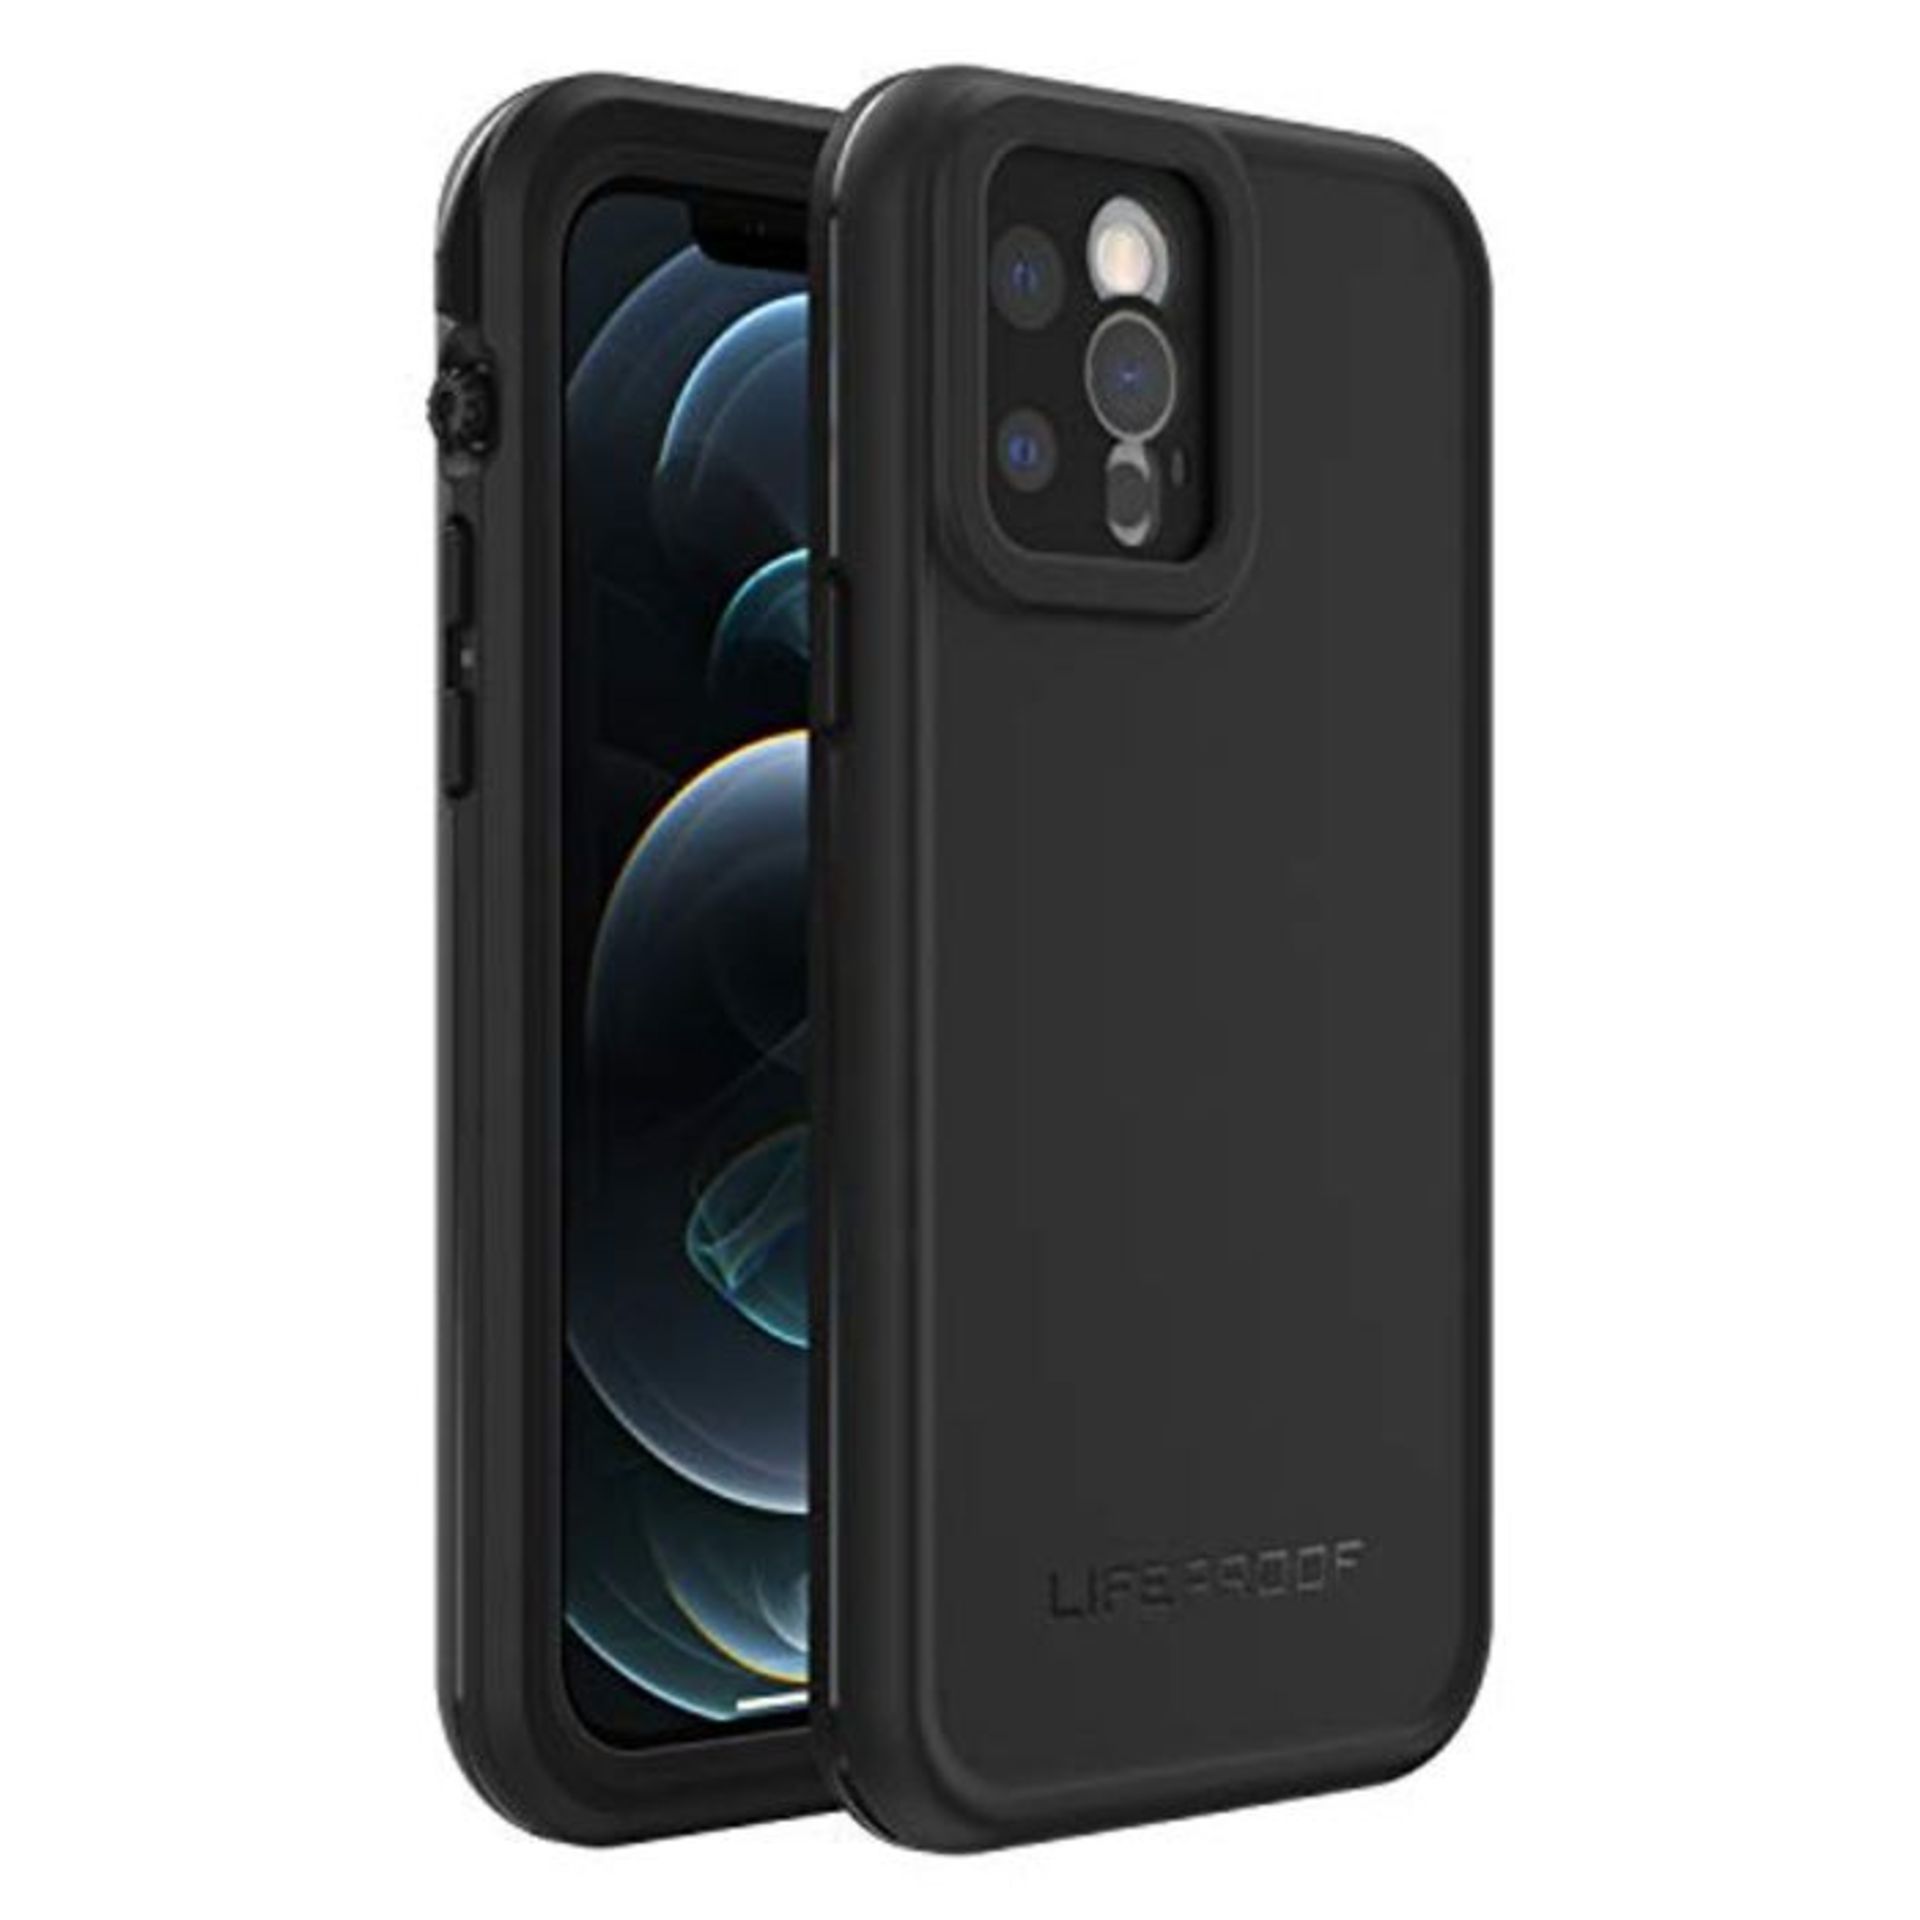 LifeProof for iPhone 12 Pro, Waterproof Drop Protective Case, Fre Series, Black - Image 6 of 9